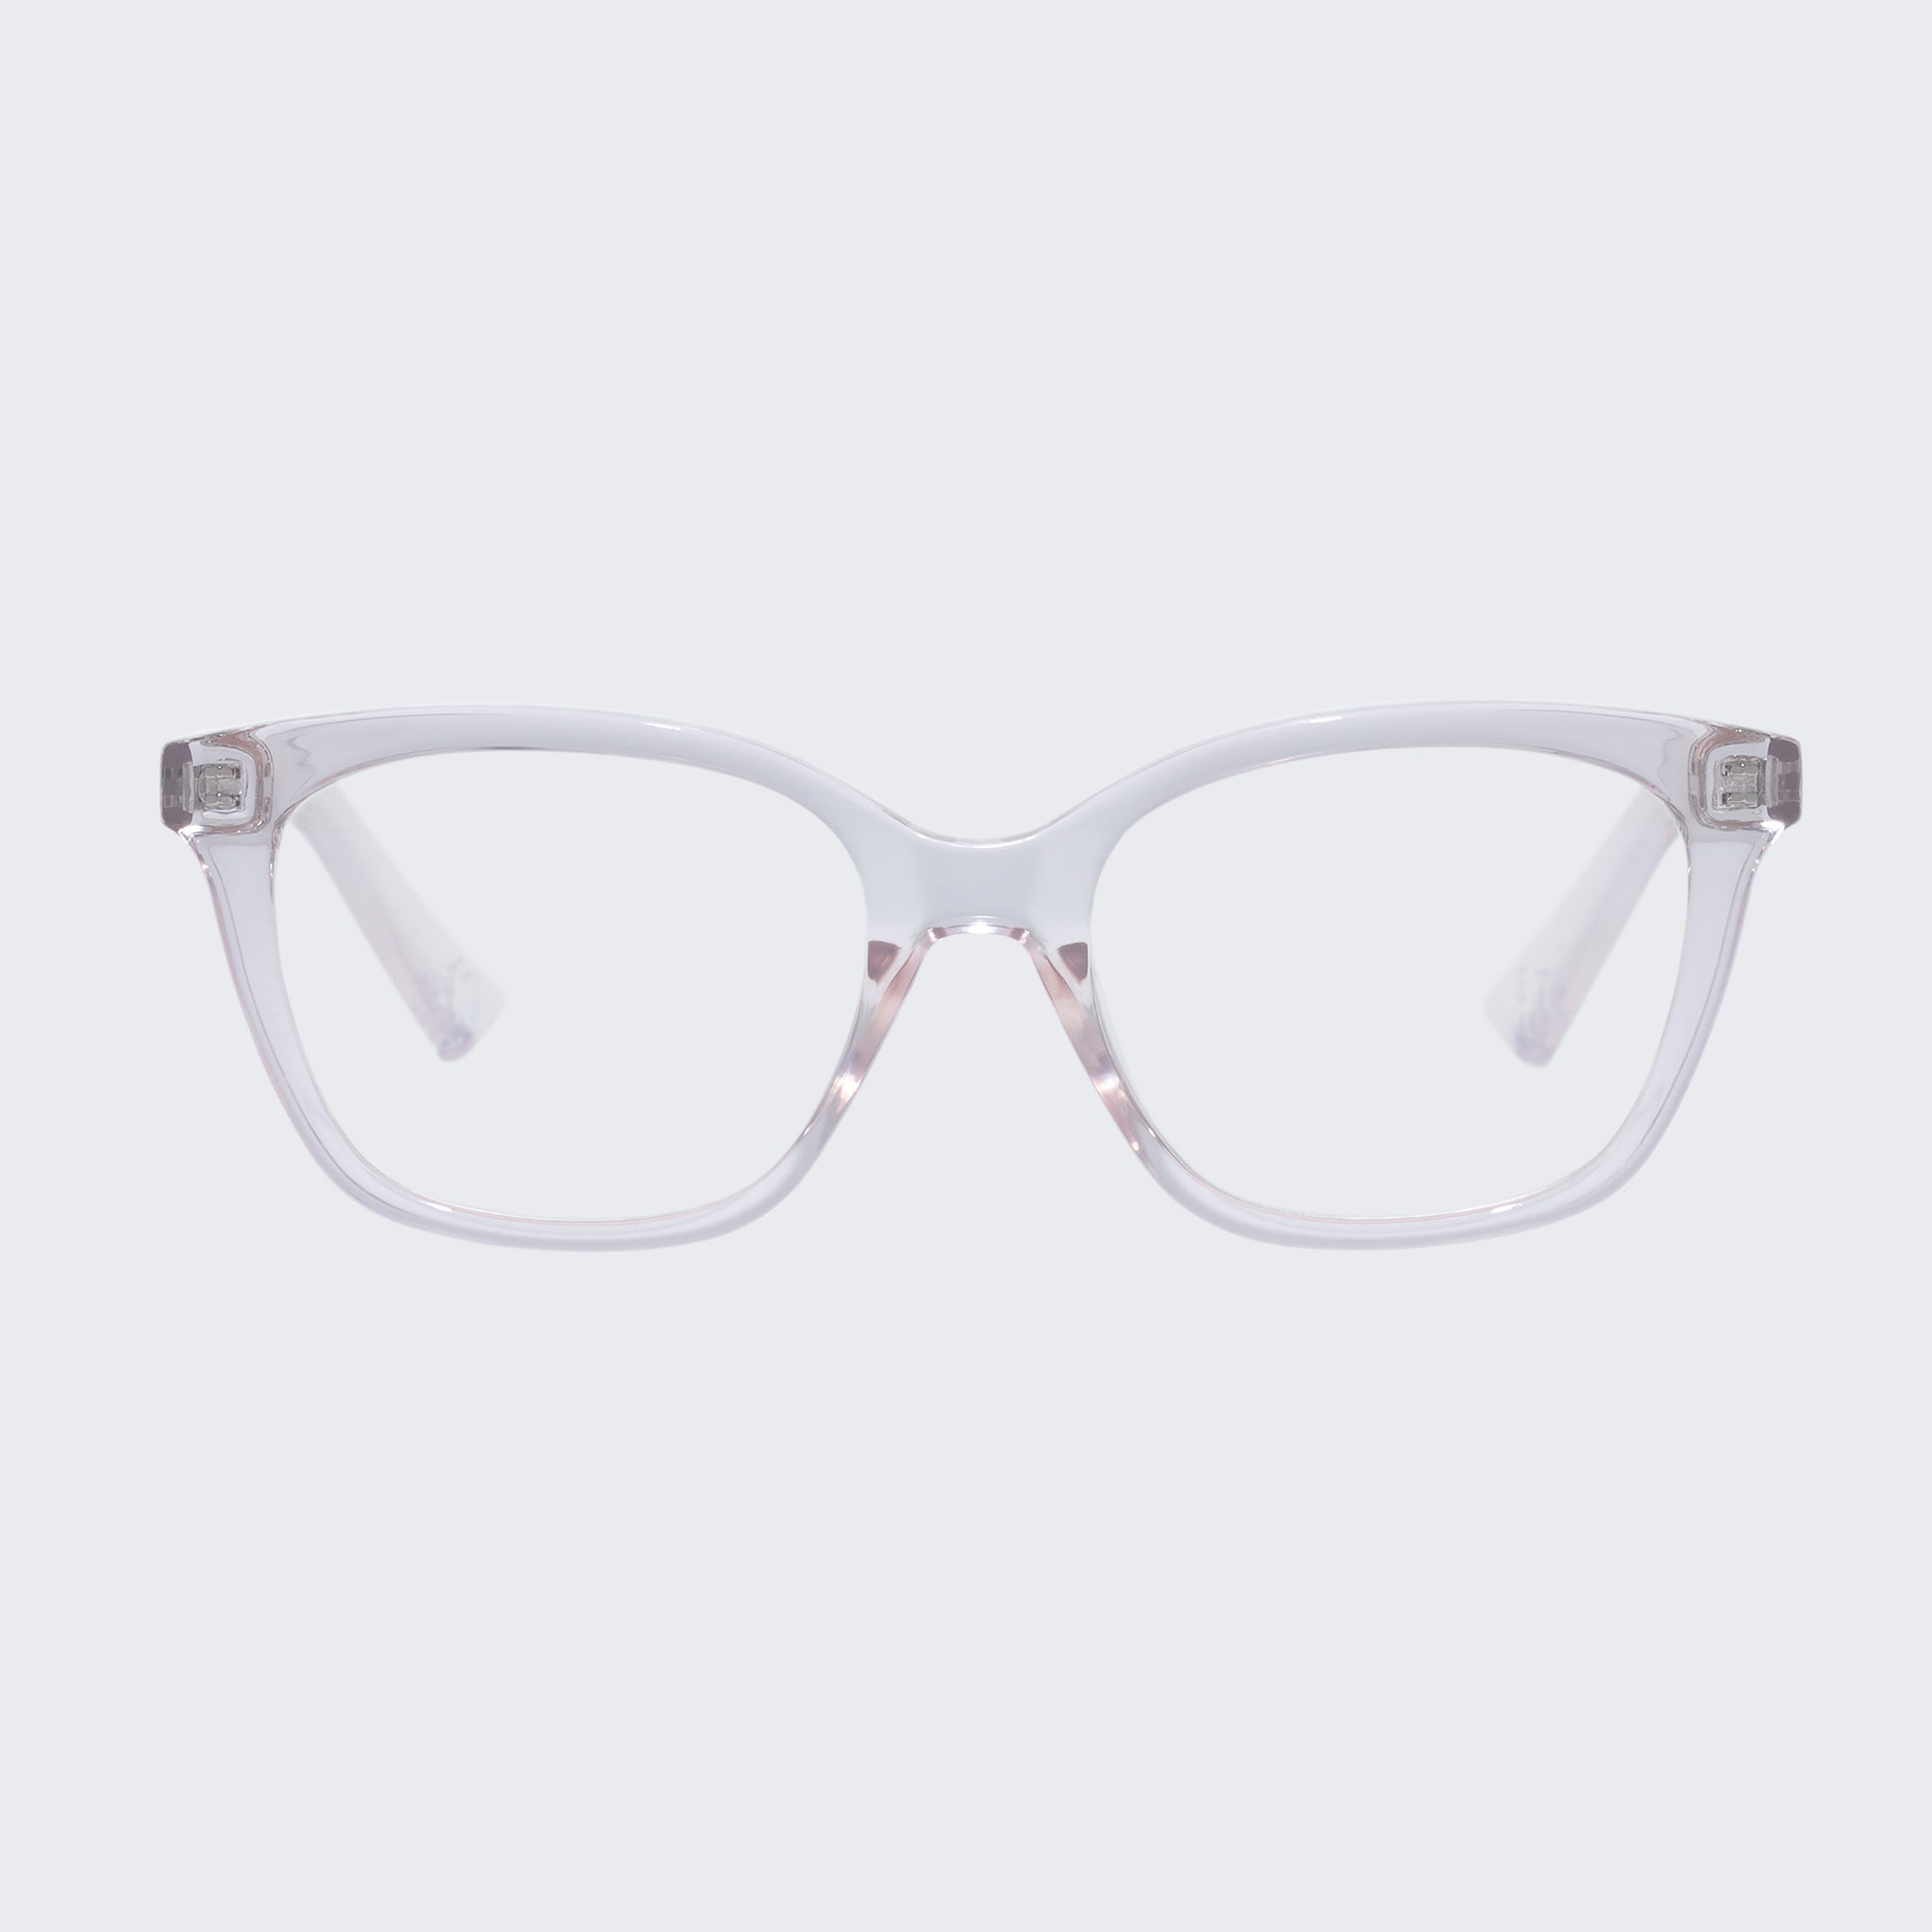 The Book Club "The Aches Of Math" Blue Light Reading Glasses - Floss